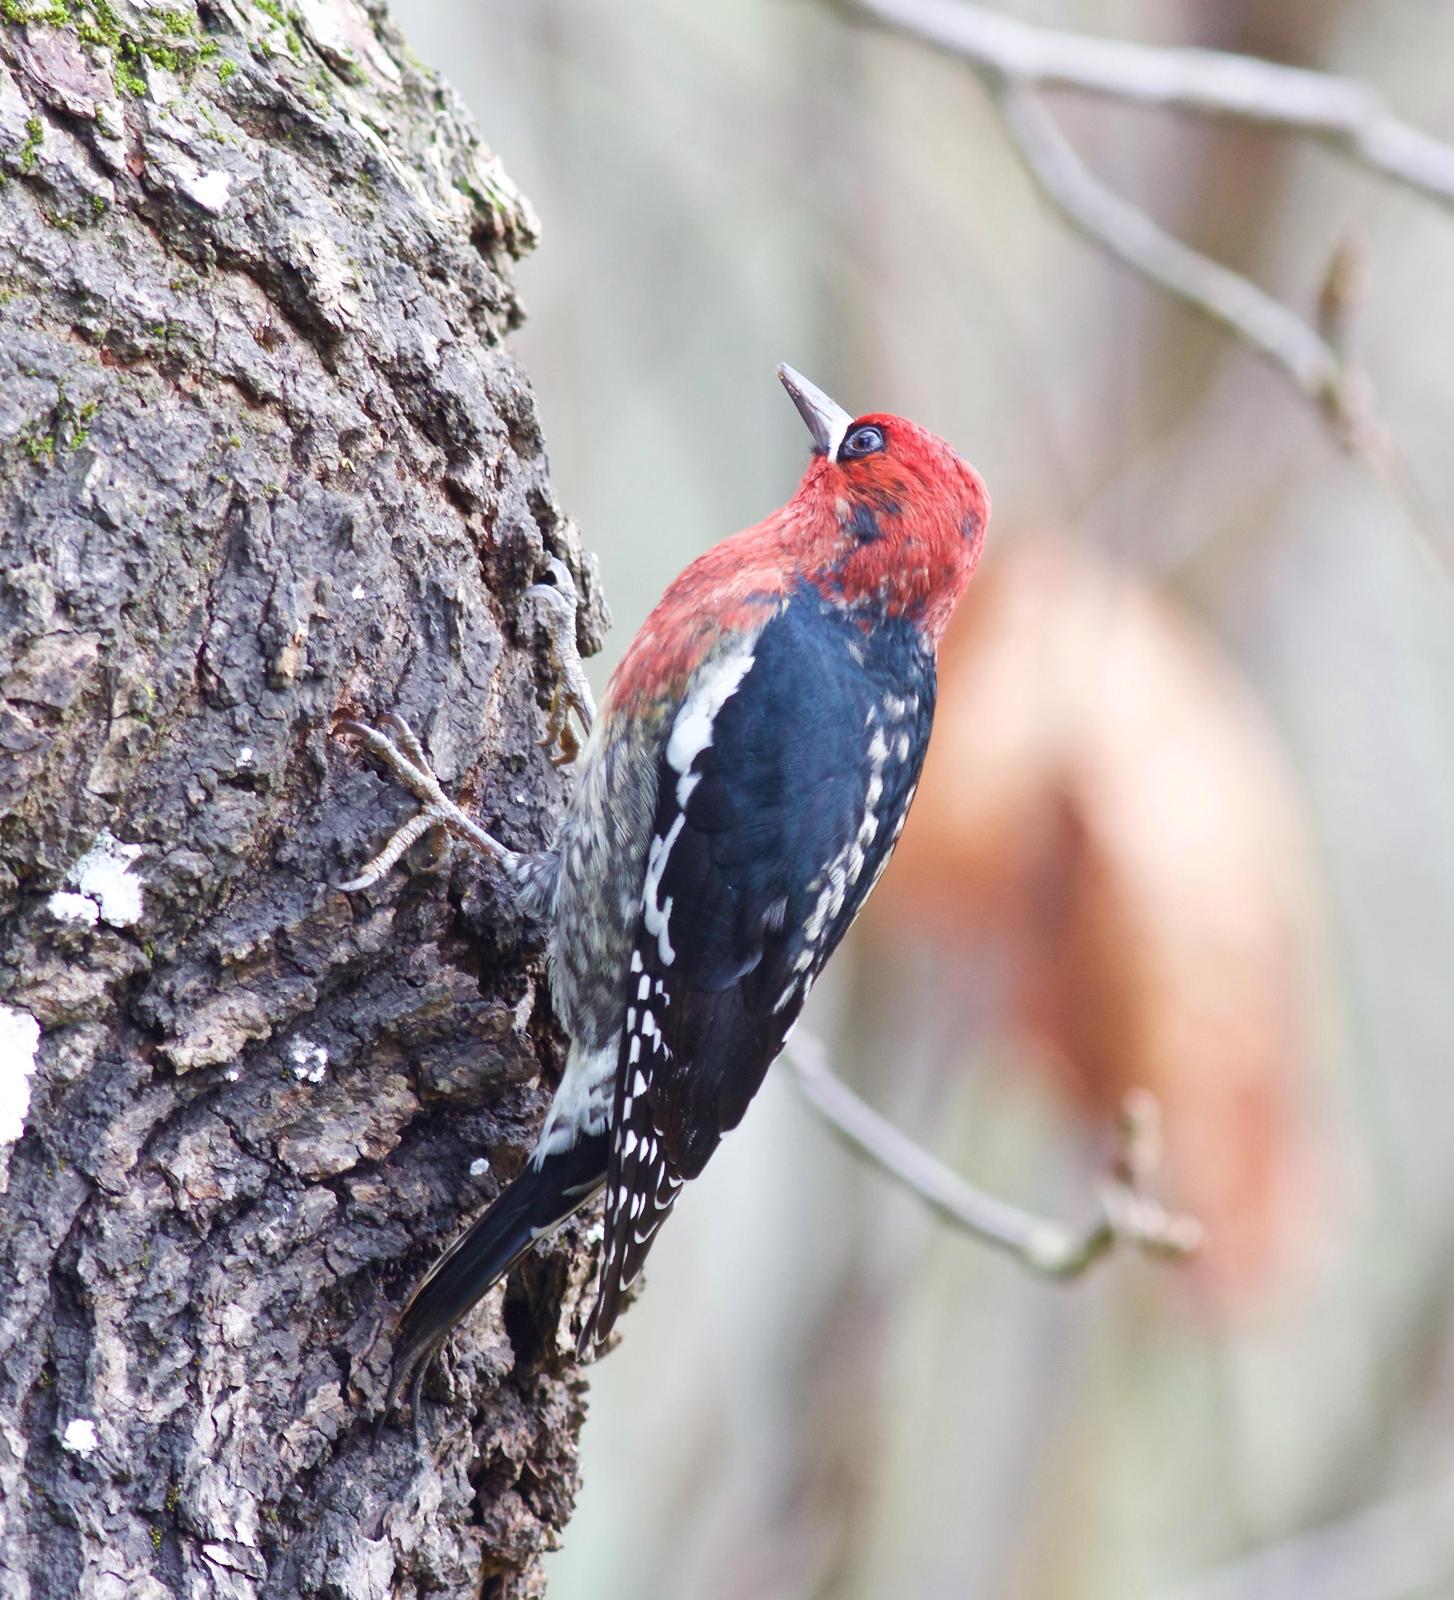 Red-breasted Sapsucker Photo by Kathryn Keith